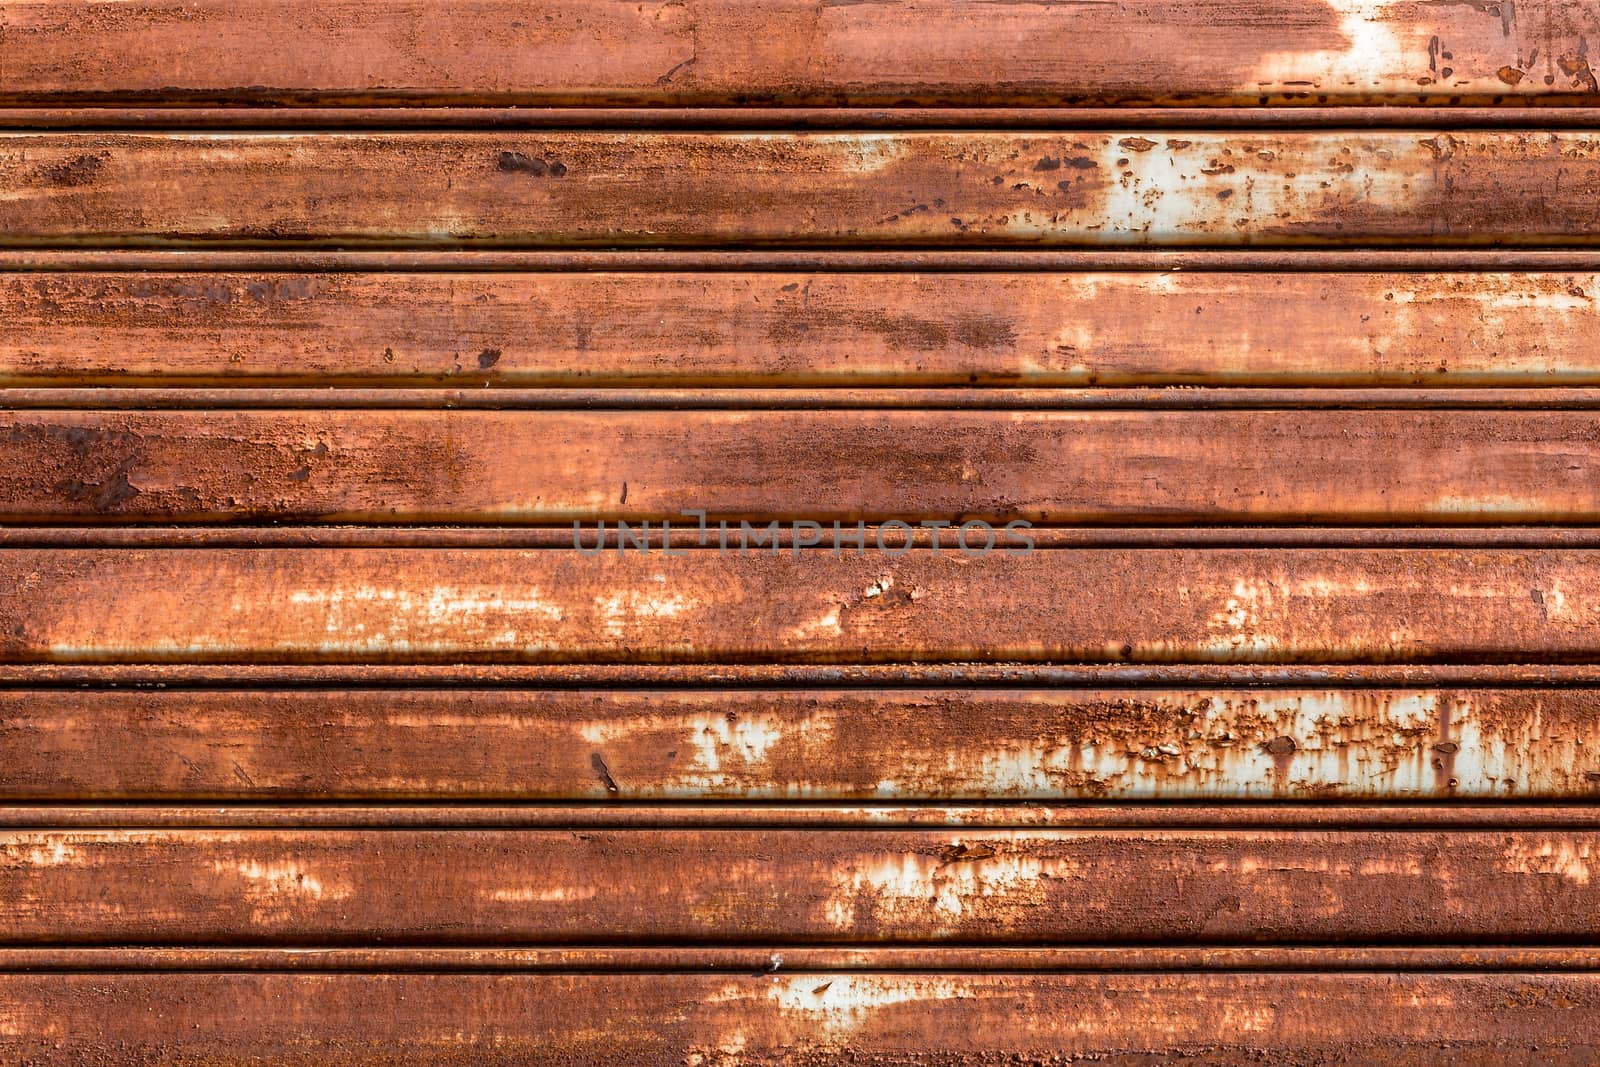 Front view of a shutter rusted, deteriorated from elements.